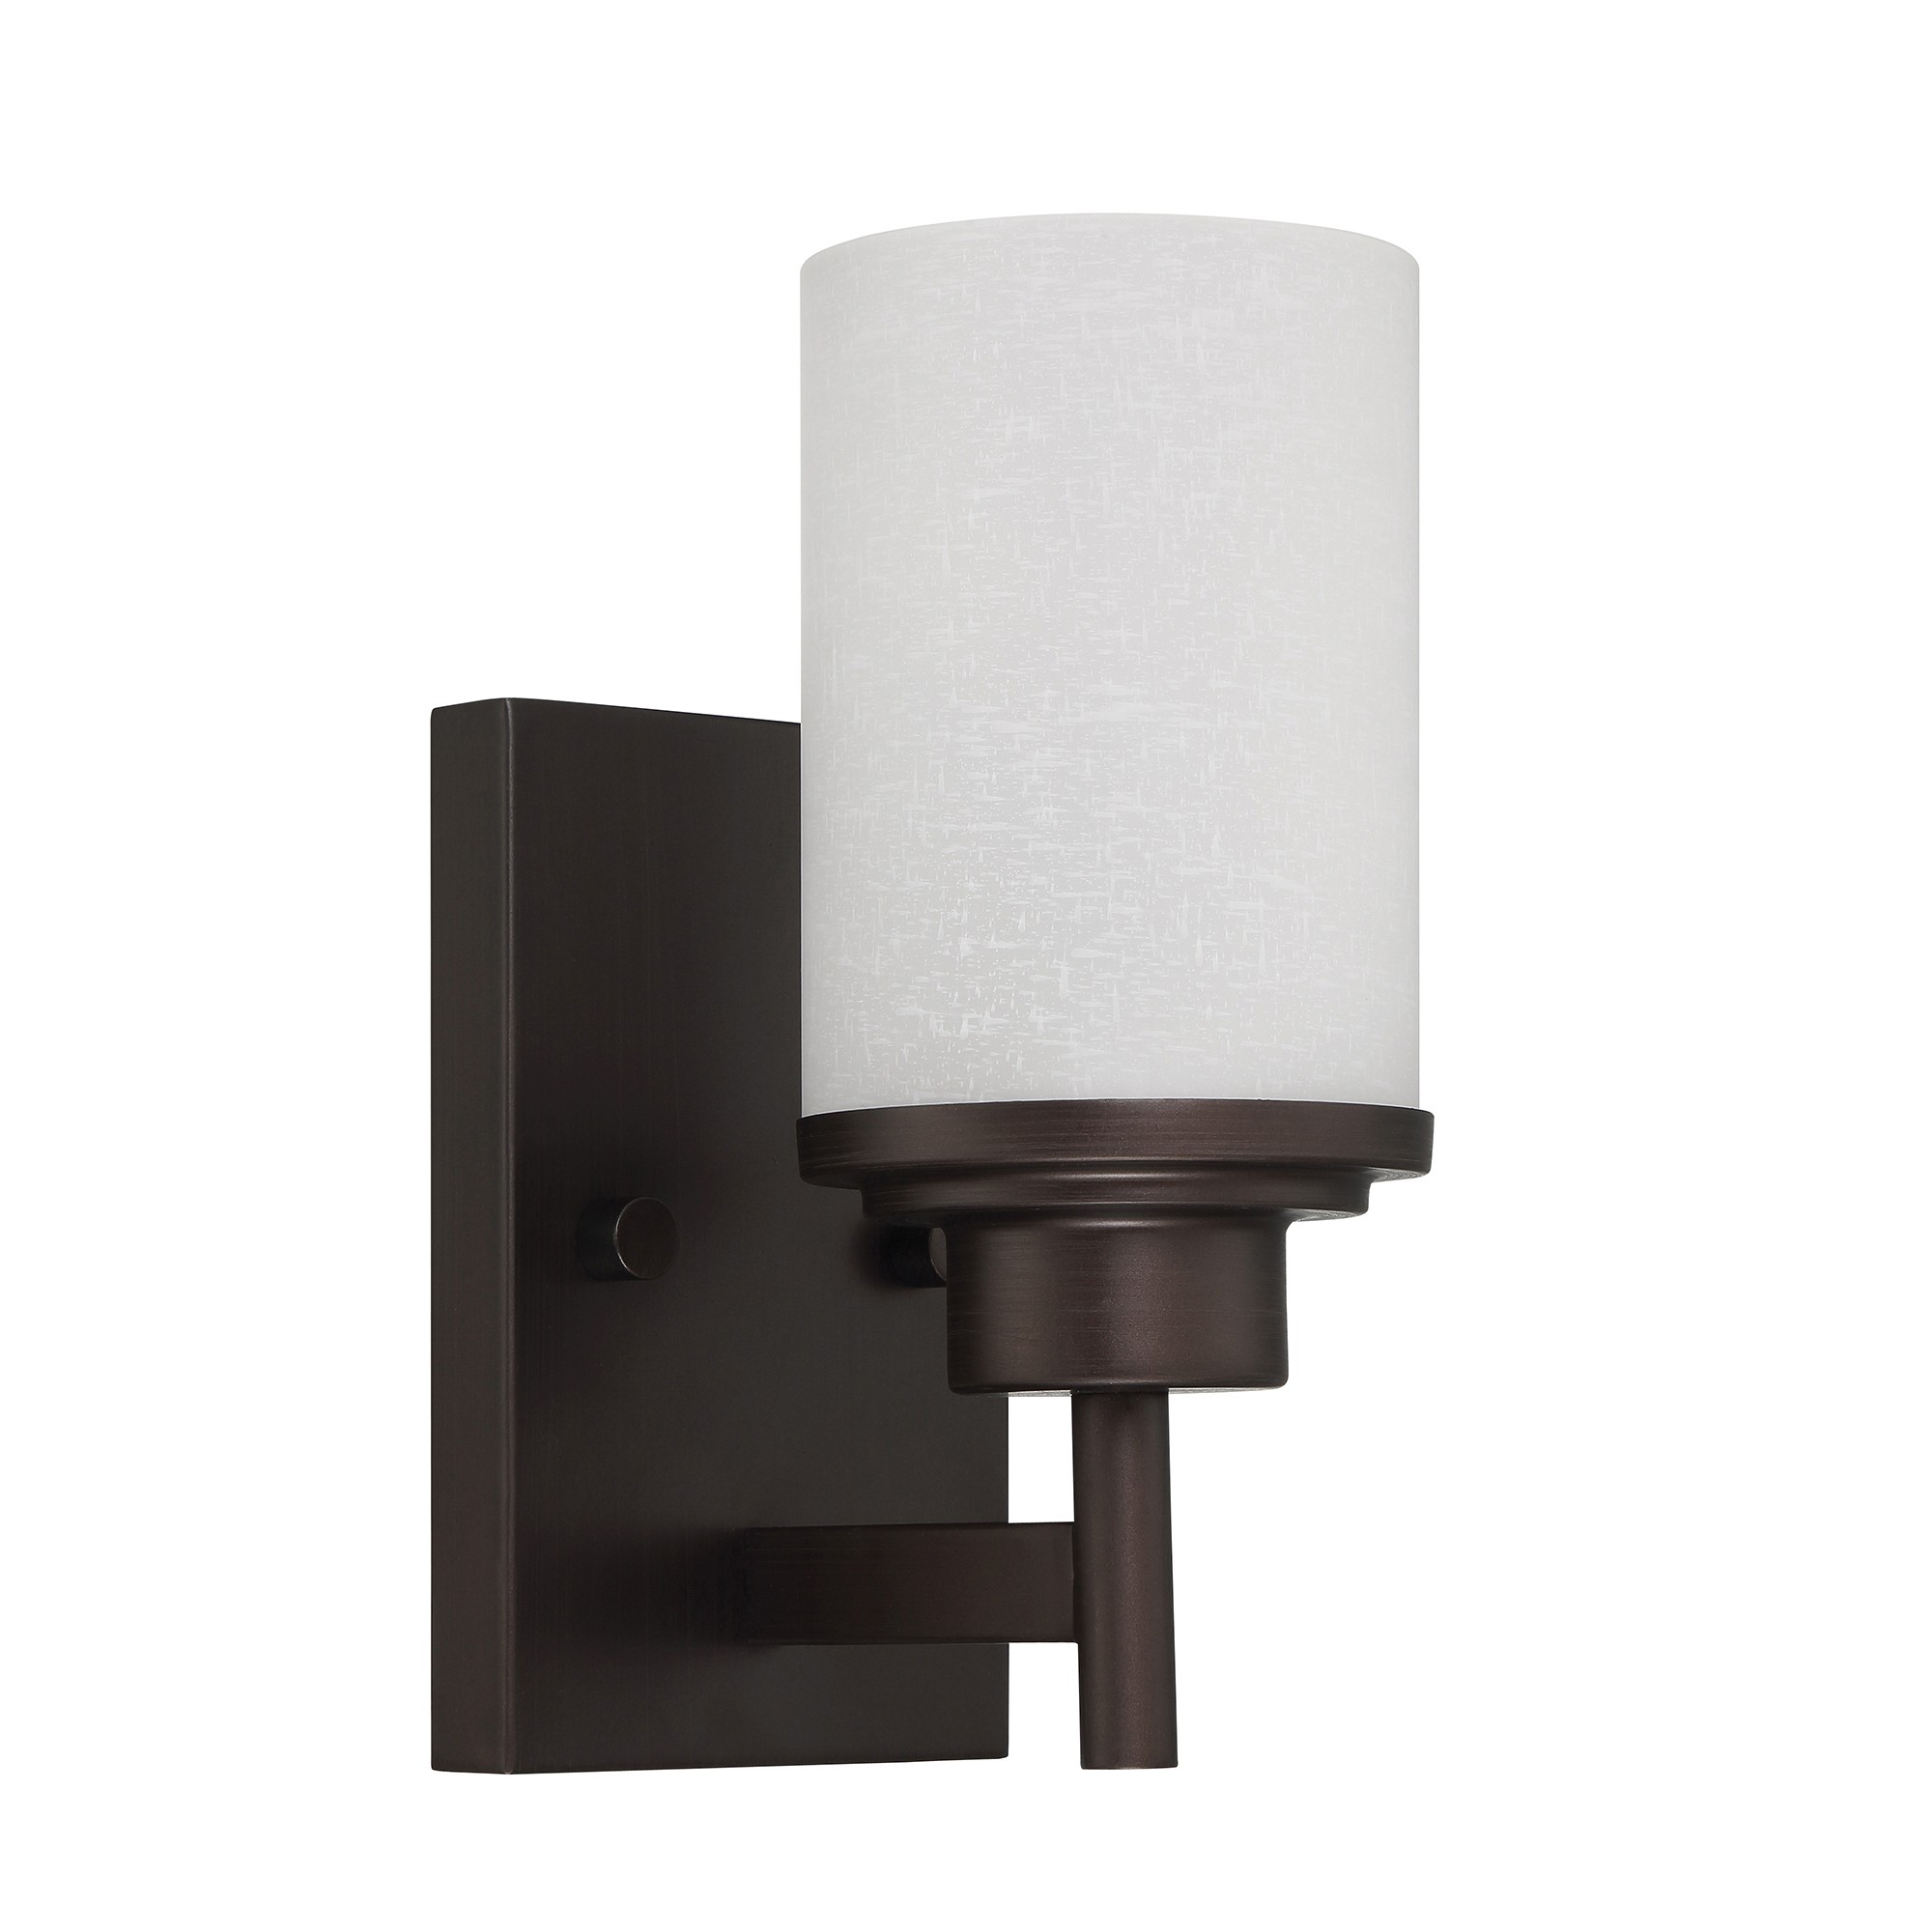 Sunset Lighting Somes One Light Wall Sconce - Linen Glass, Dimmable - With Provincial Bronze Finish